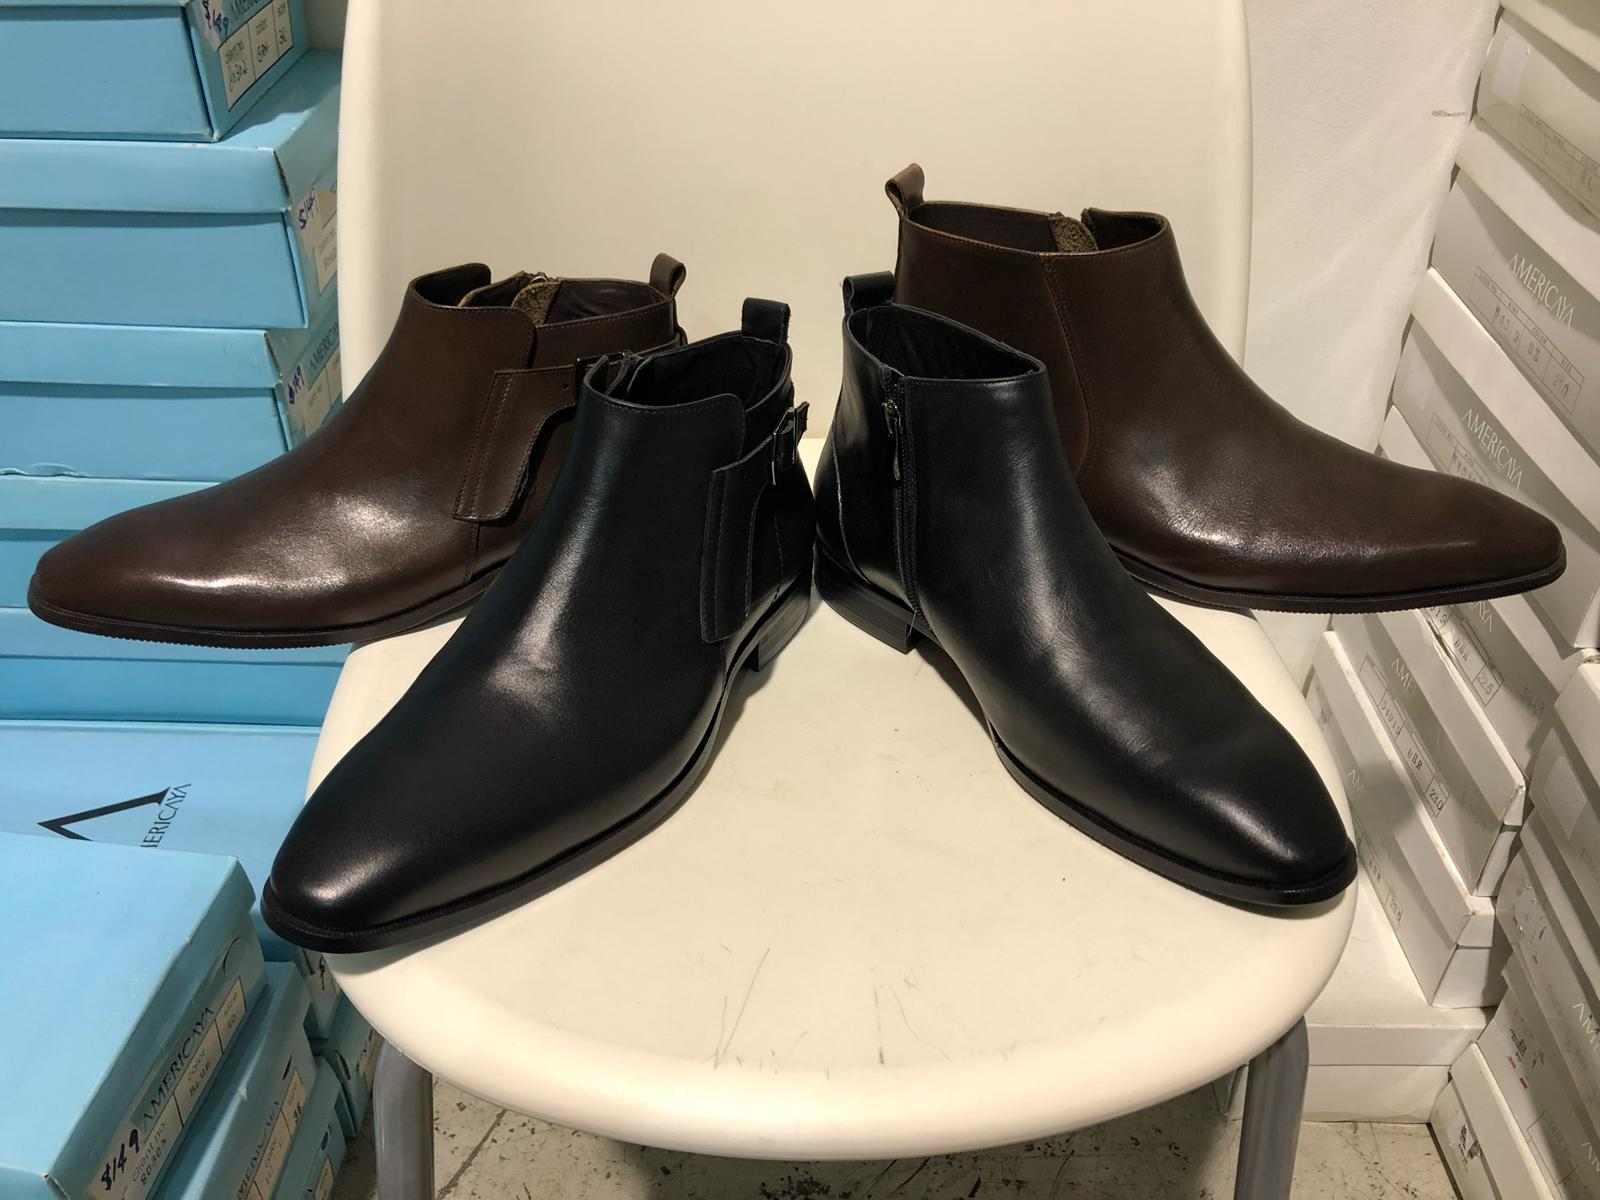 Americaya Warehouse Sale Has Leather Shoes, Loafers & Boots From $10 At ...